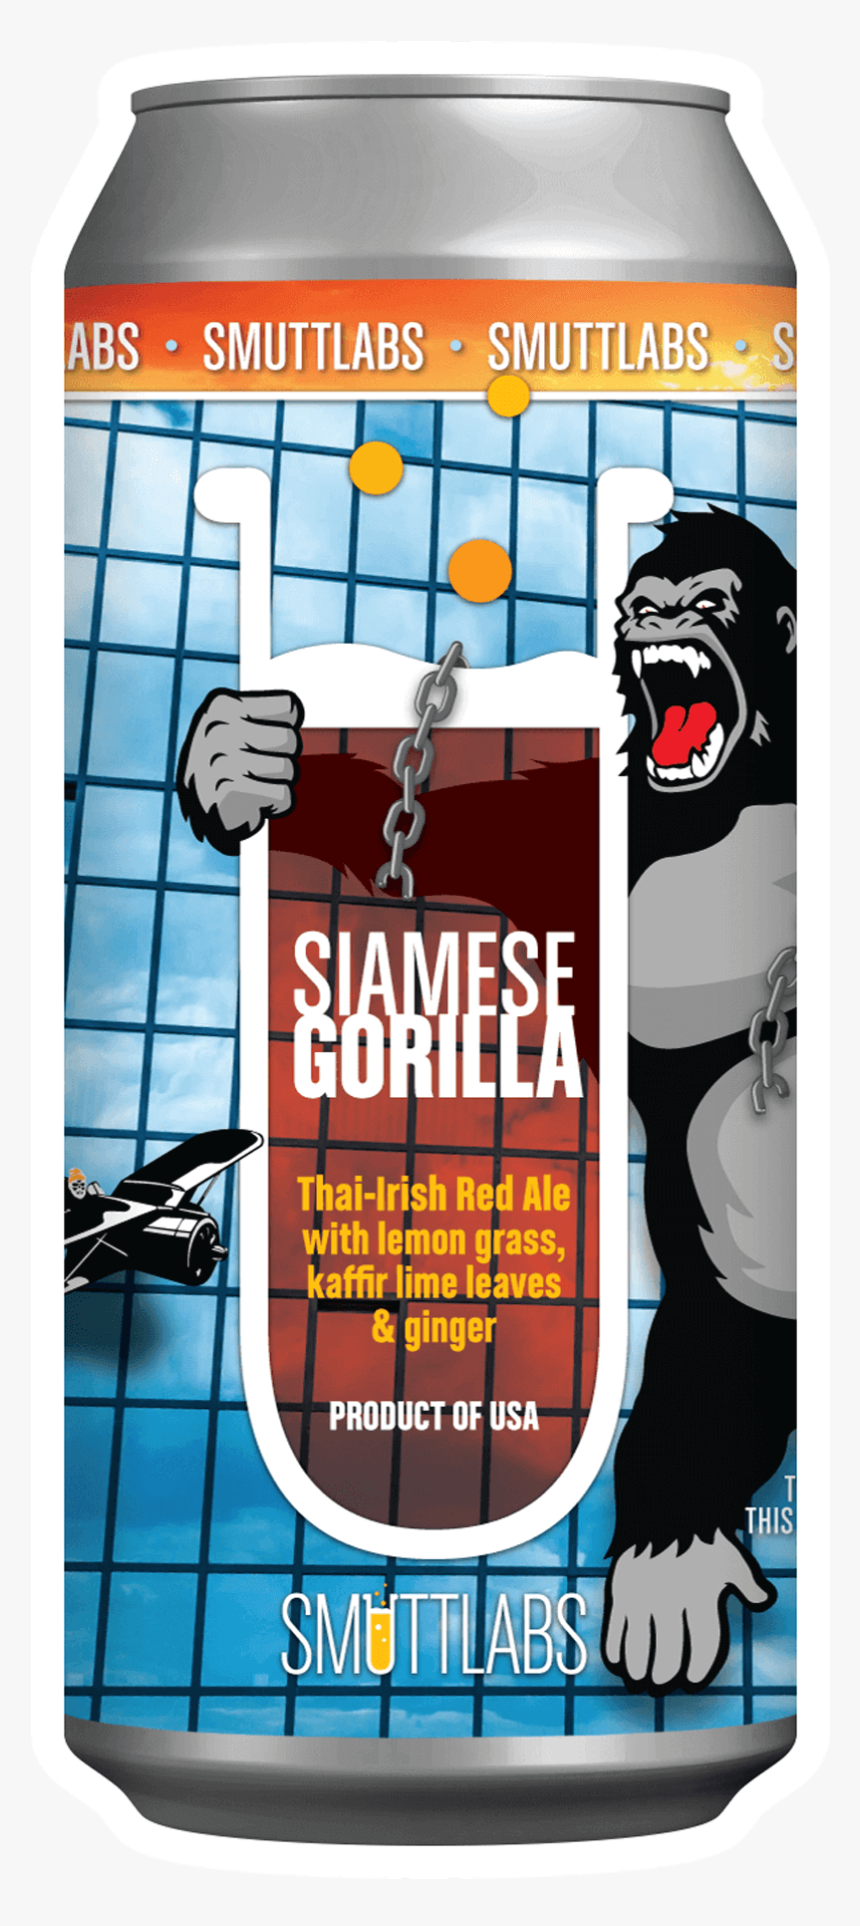 Smutty About Nh - Smuttlabs Siamese Gorilla, HD Png Download, Free Download